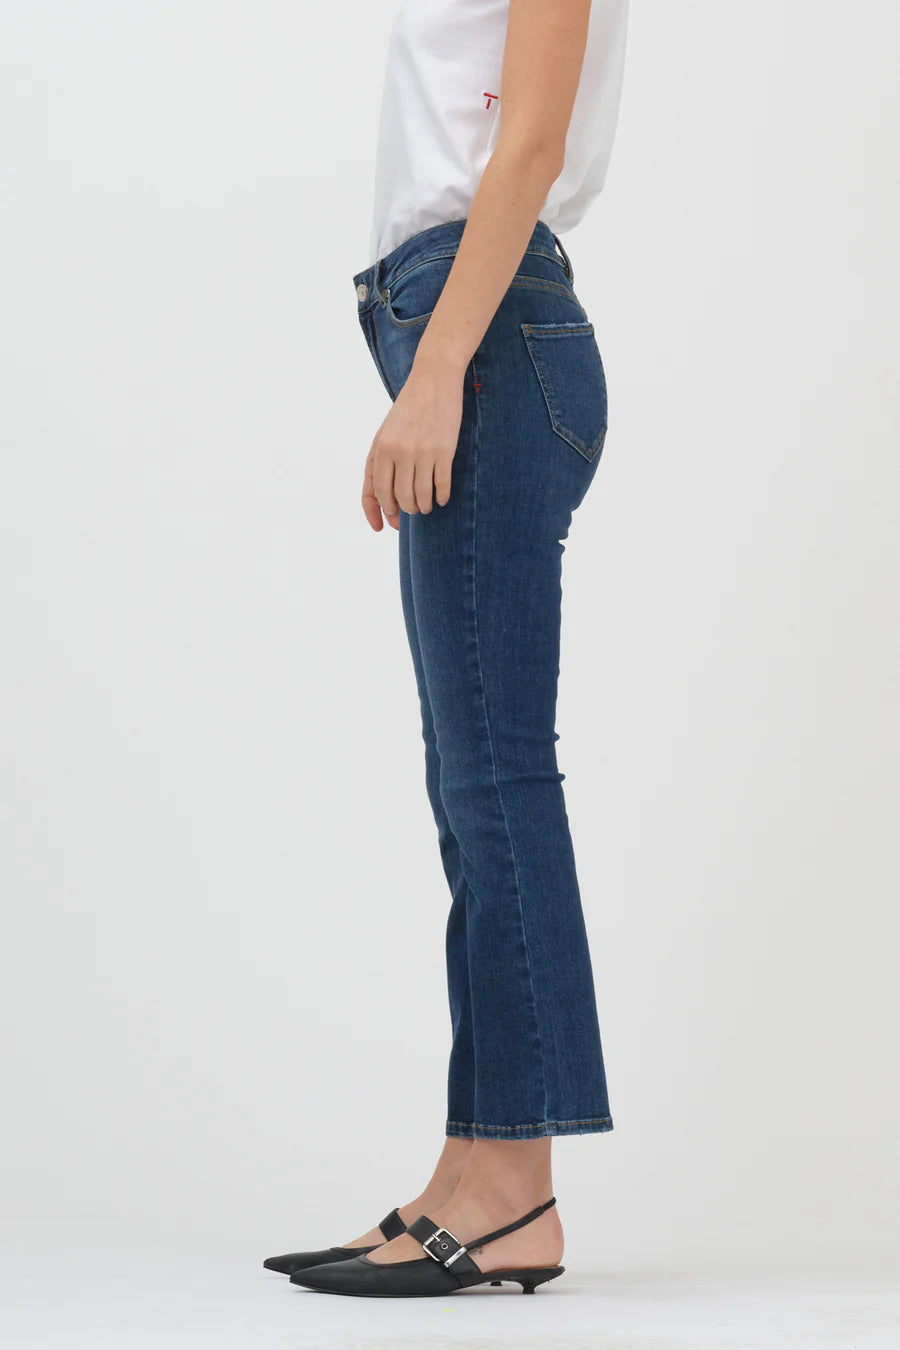 The back view of a woman wearing a pair of Tomorrow Denim's Malcolm Jeans - Denver, high waist, kick flare leg jeans.